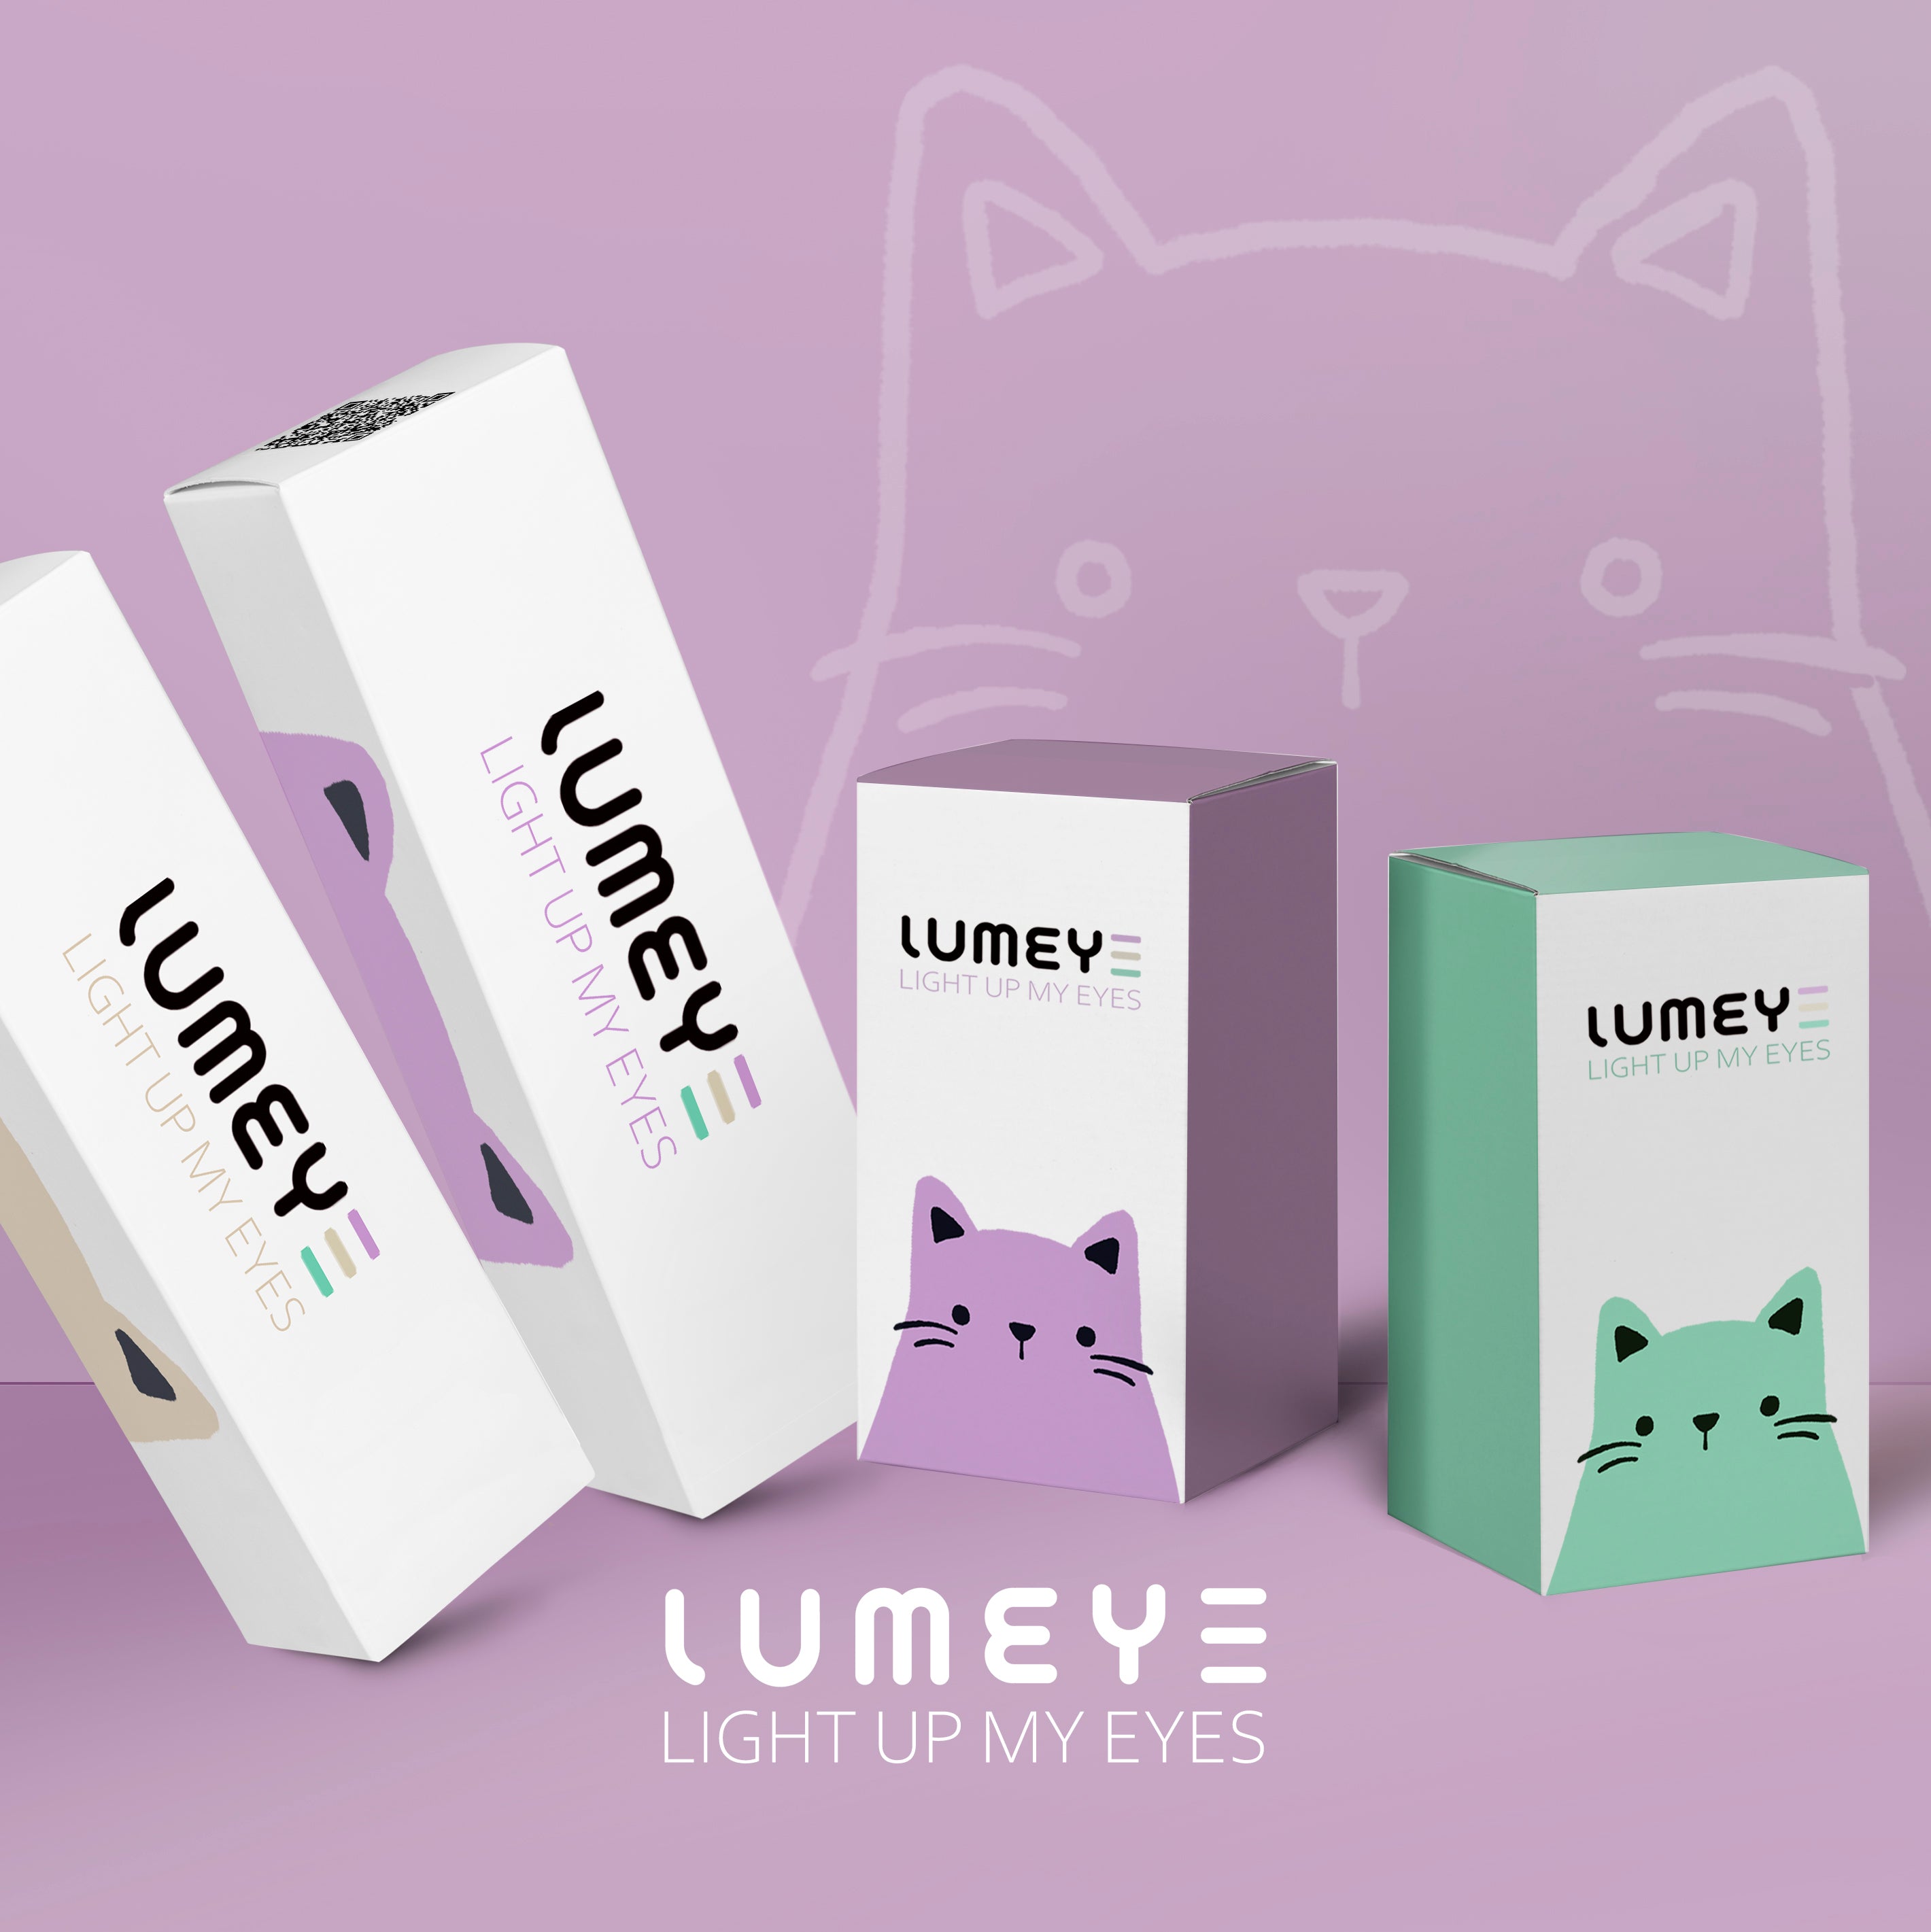 Best COLORED CONTACTS - LUMEYE Hulk Green Colored Contact Lenses - LUMEYE